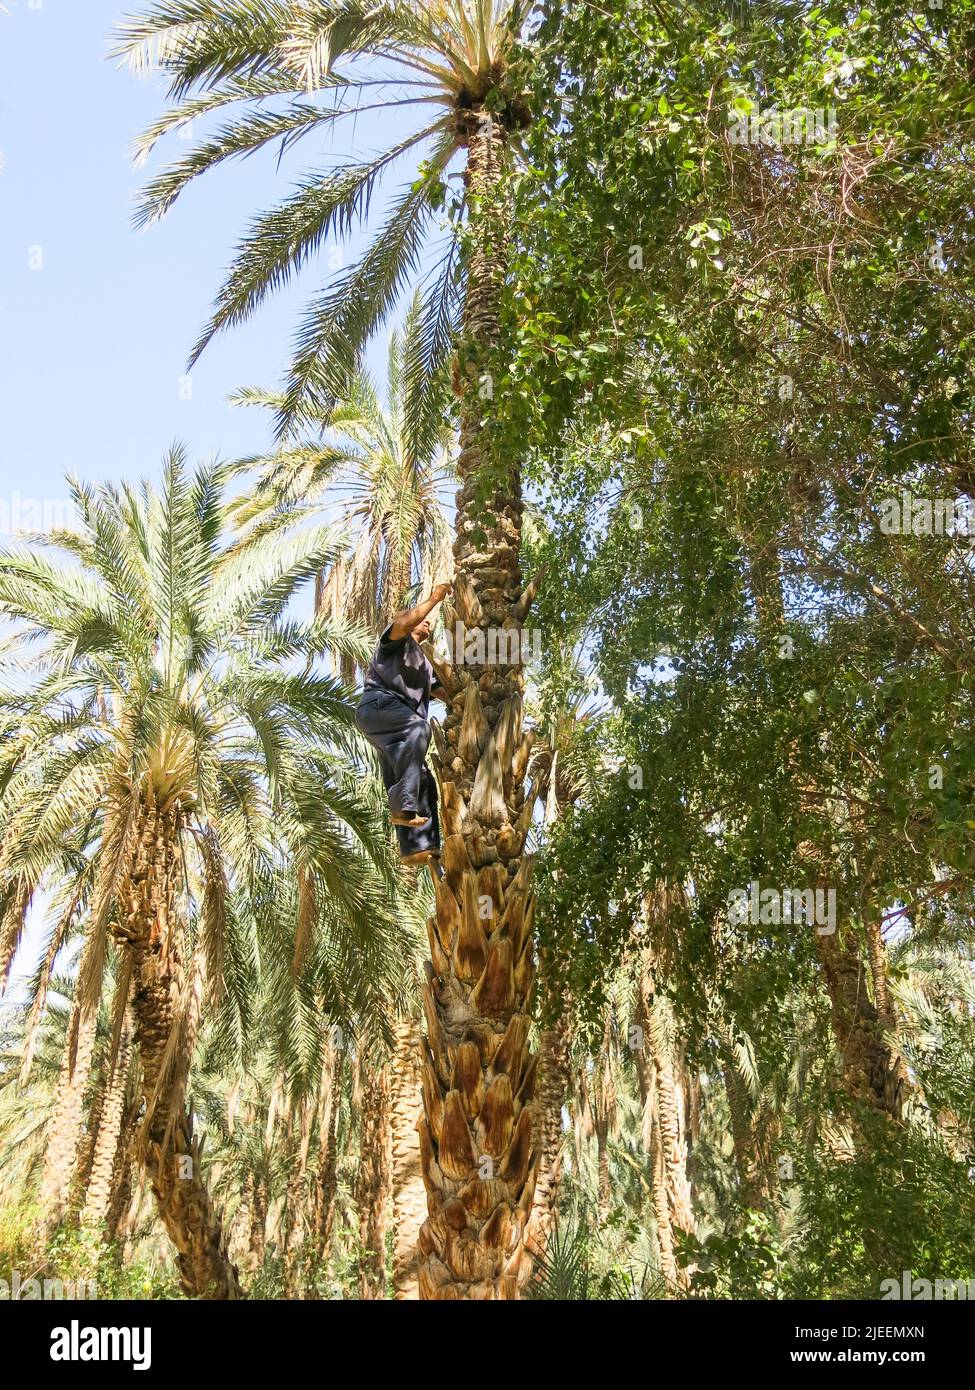 Tree Climber Ascending to the Top of Date Palm parrrin Desert Oasis, Tunisia Stock Photo